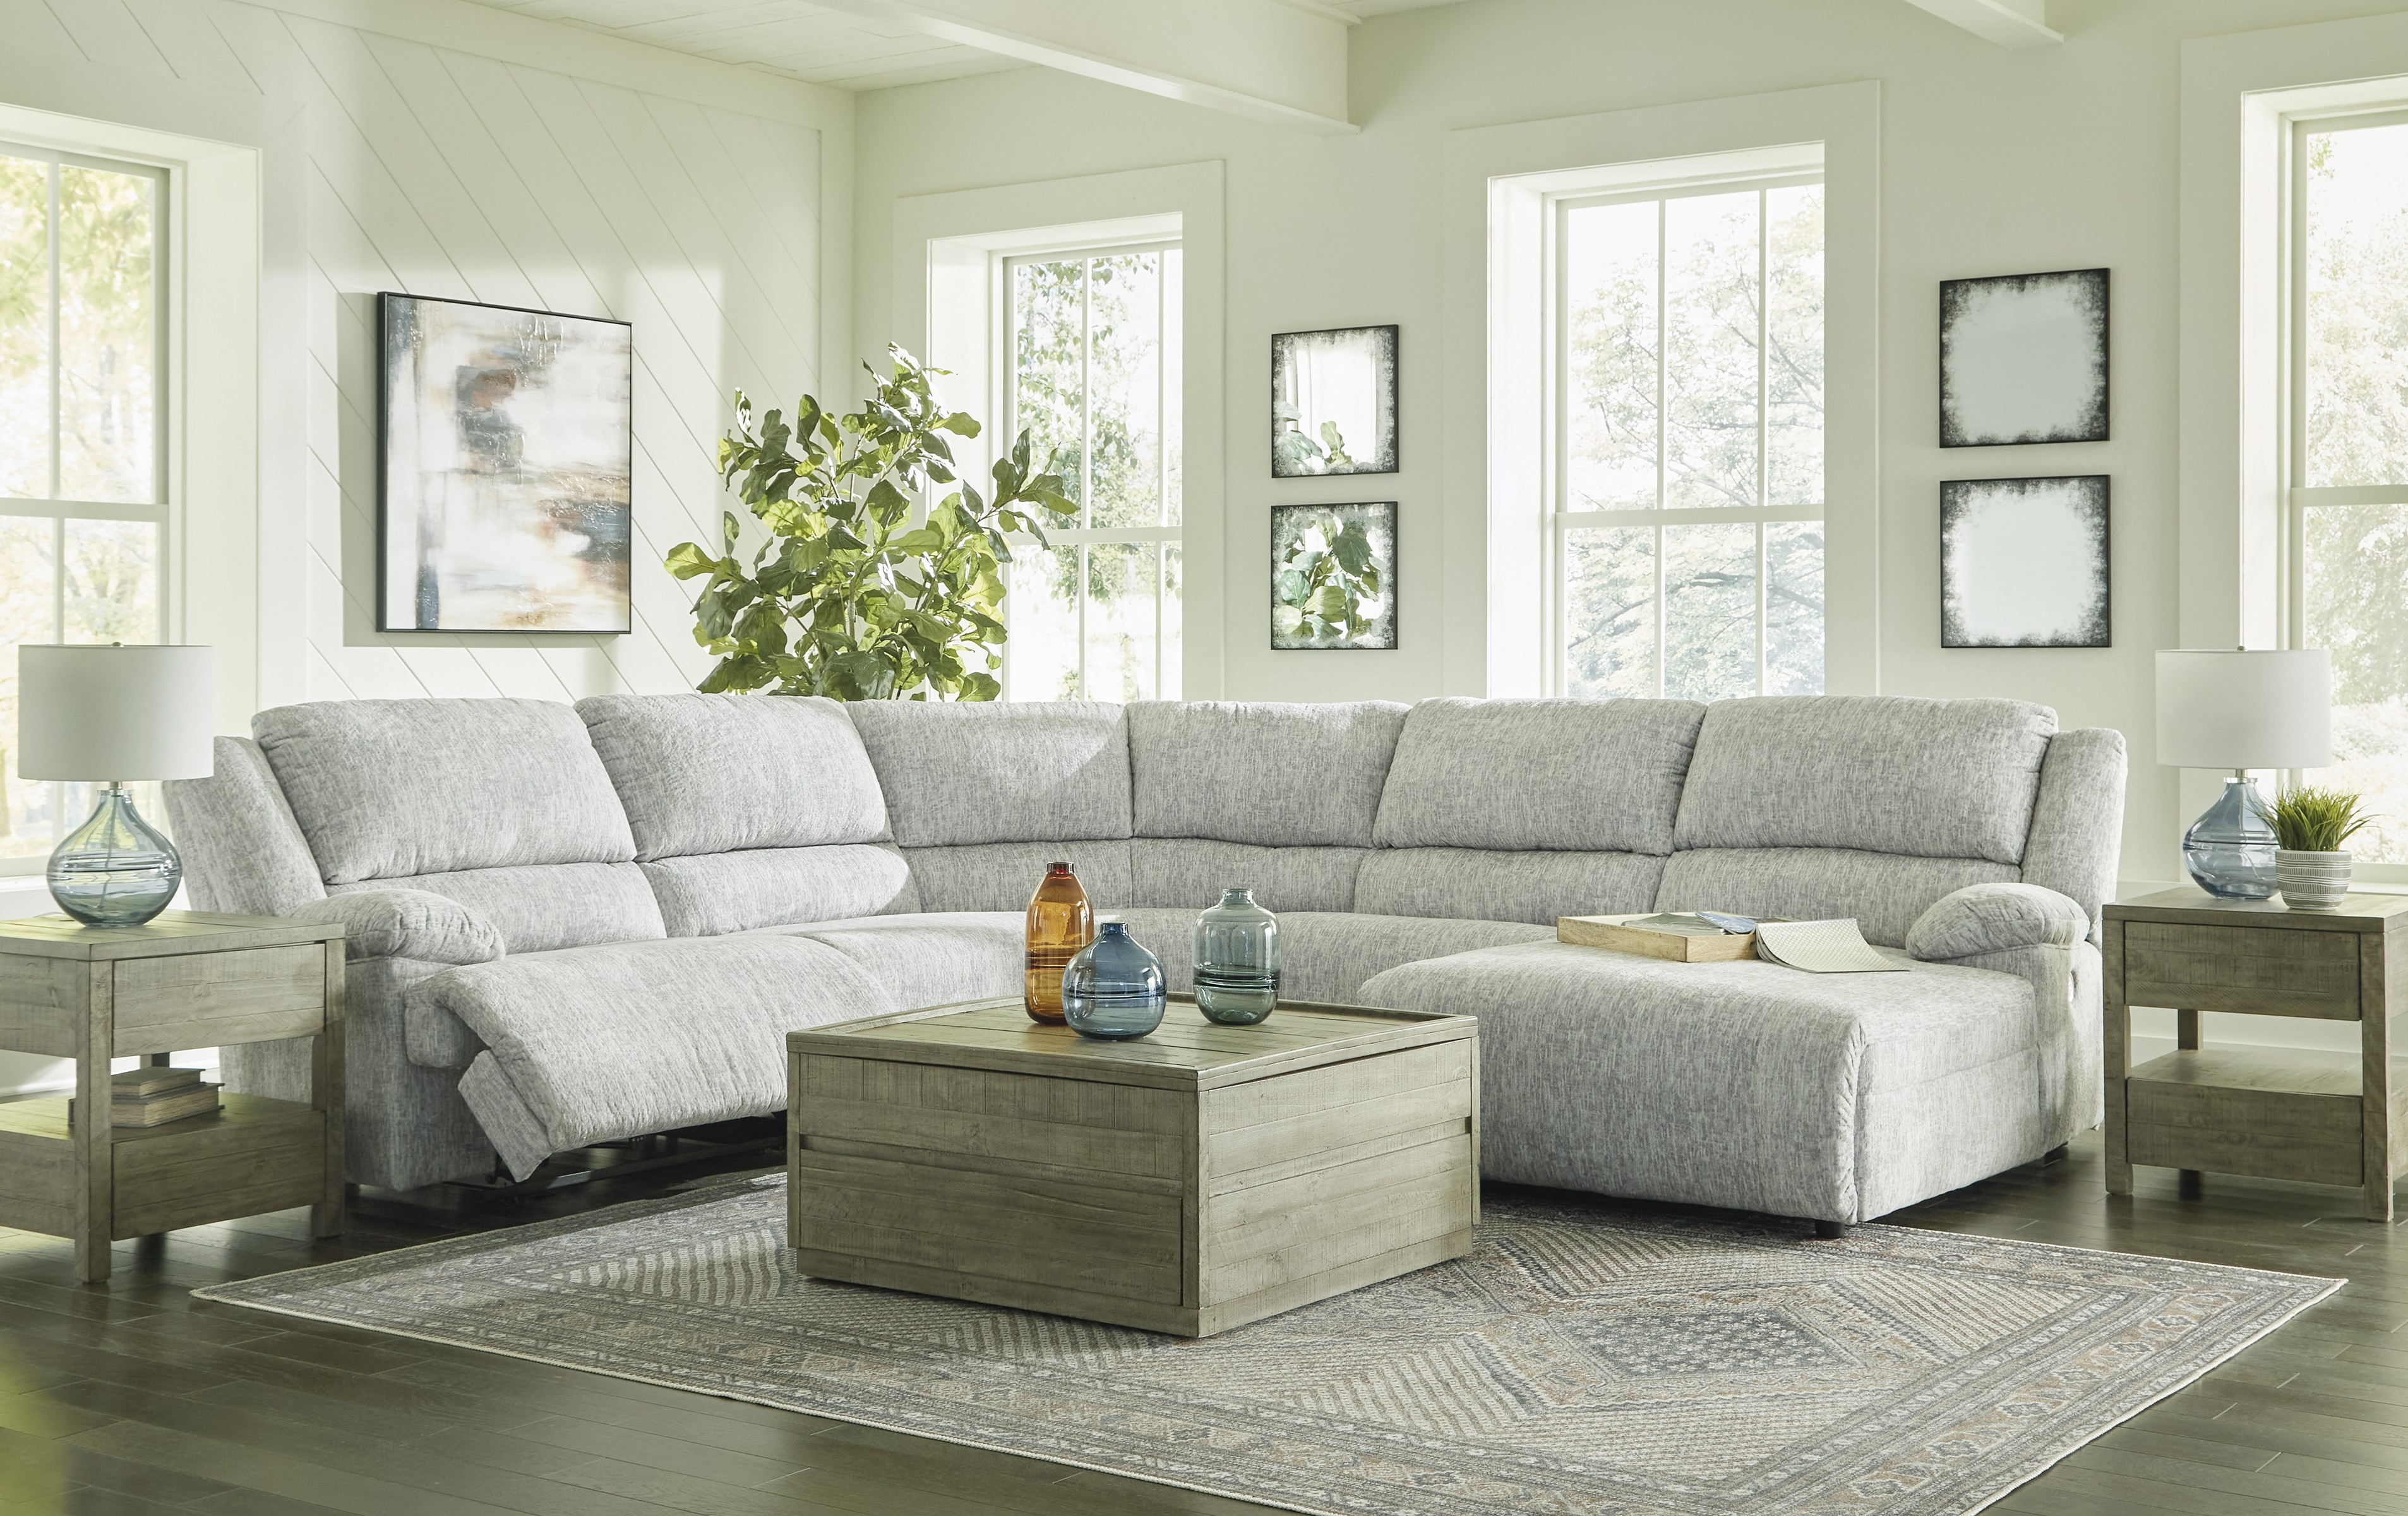 Tamiel 5 Pc. Reclining Sectional W/ Reclining Chaise